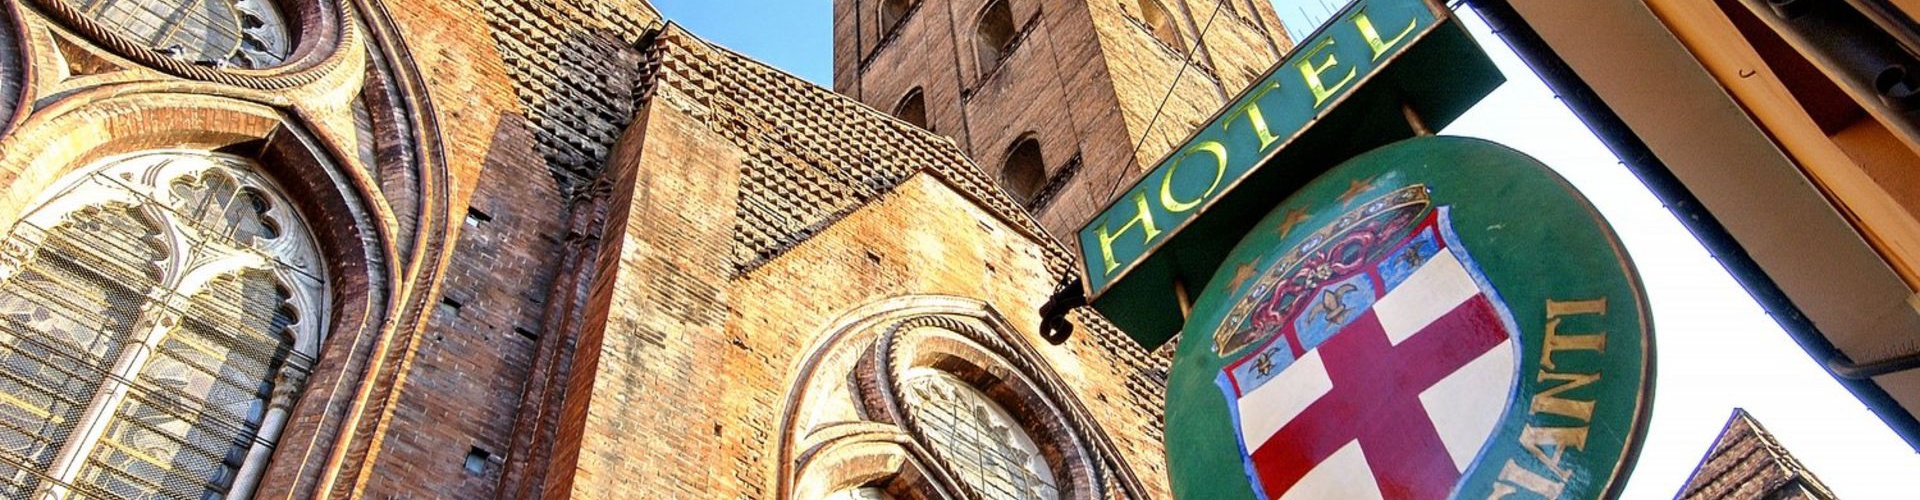 Commercianti Hotel rediseño - ボローニャ - The Etruscan city: the other face of Bologna